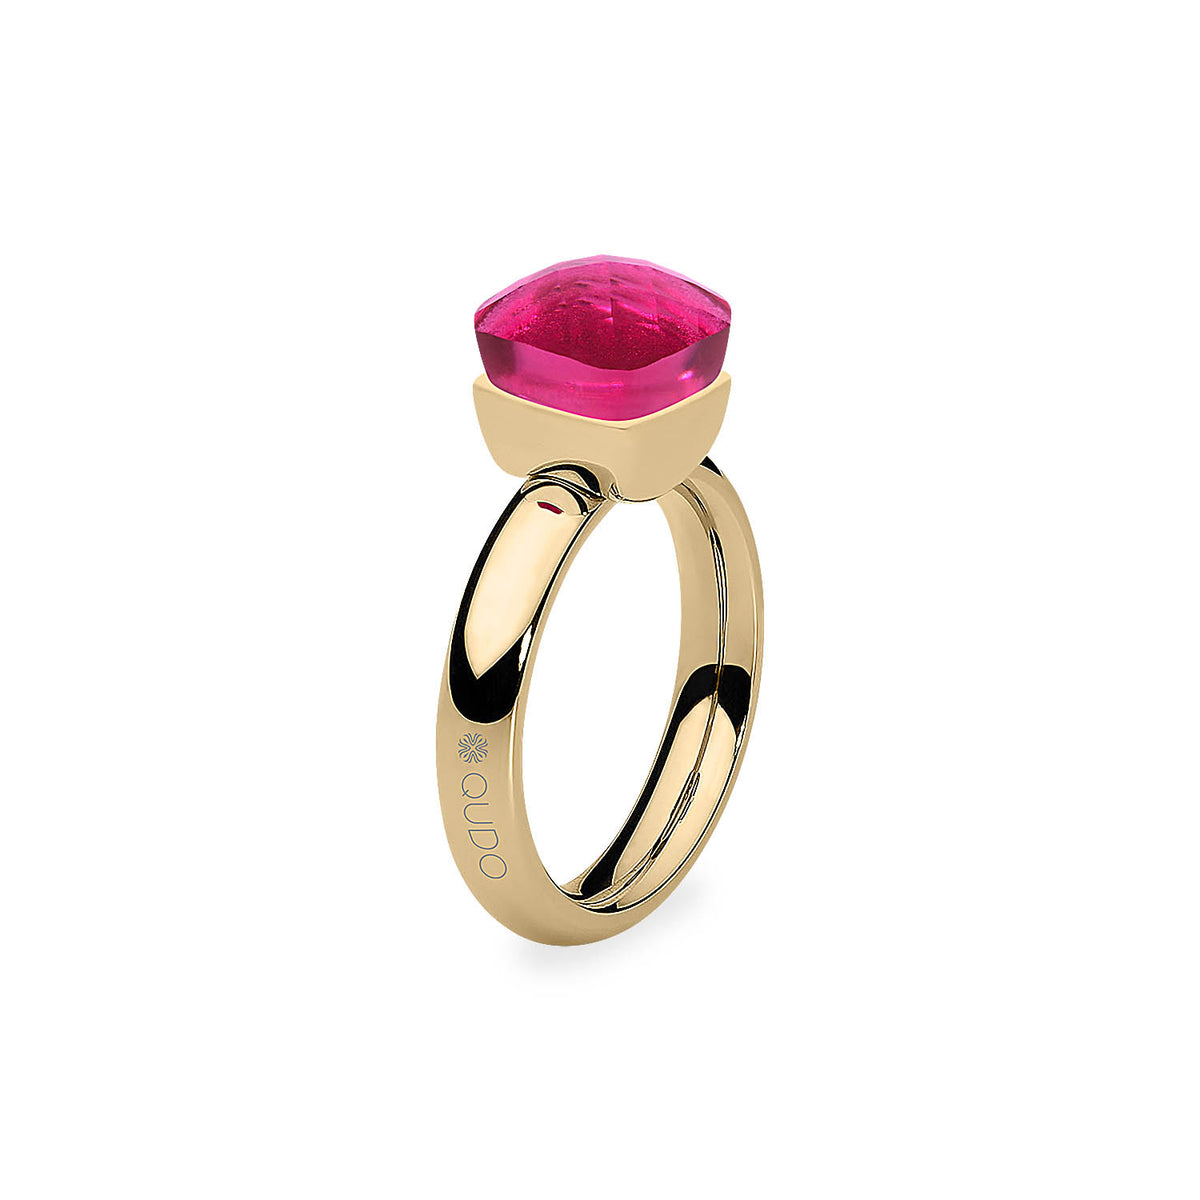 Firenze Ring - Shades of Red & Purple - Gold